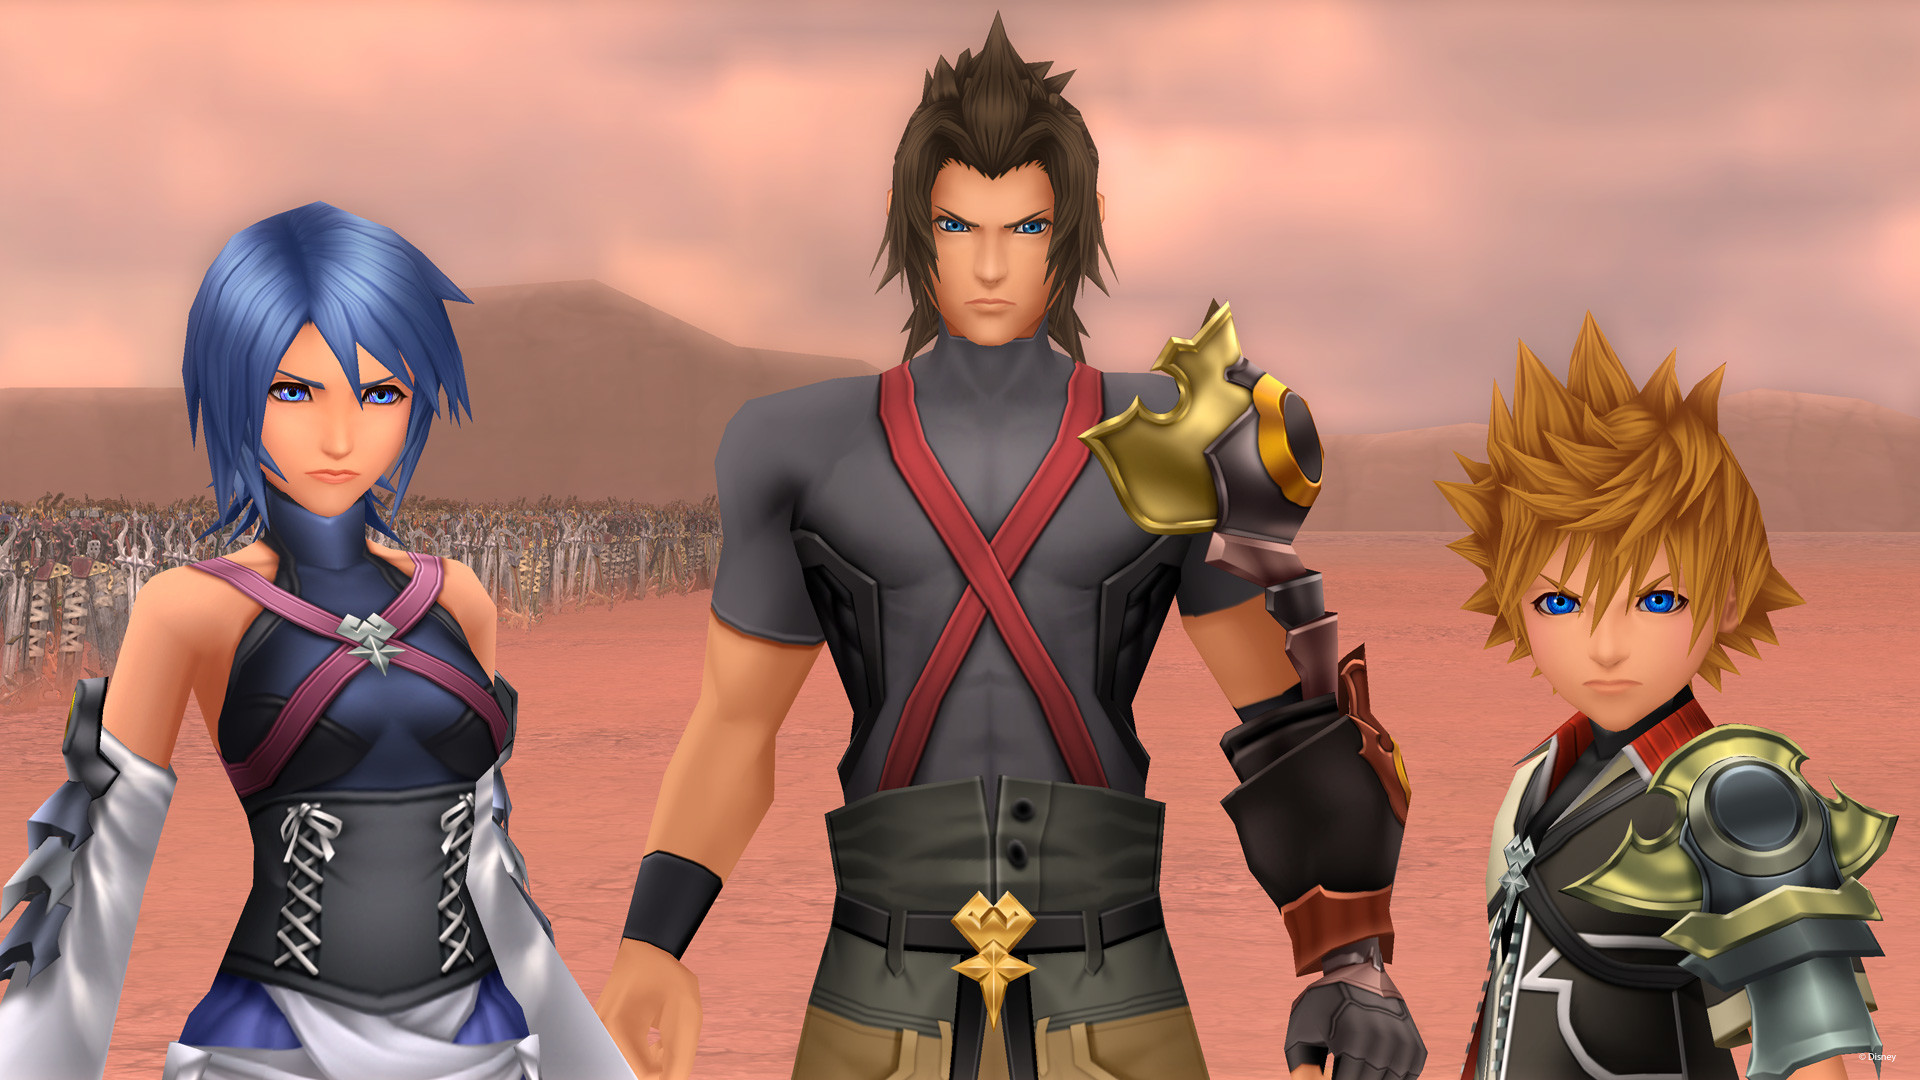 1920x1080 'Kingdom Hearts 3' Basically Requires That You Play These Two Games First |  Inverse